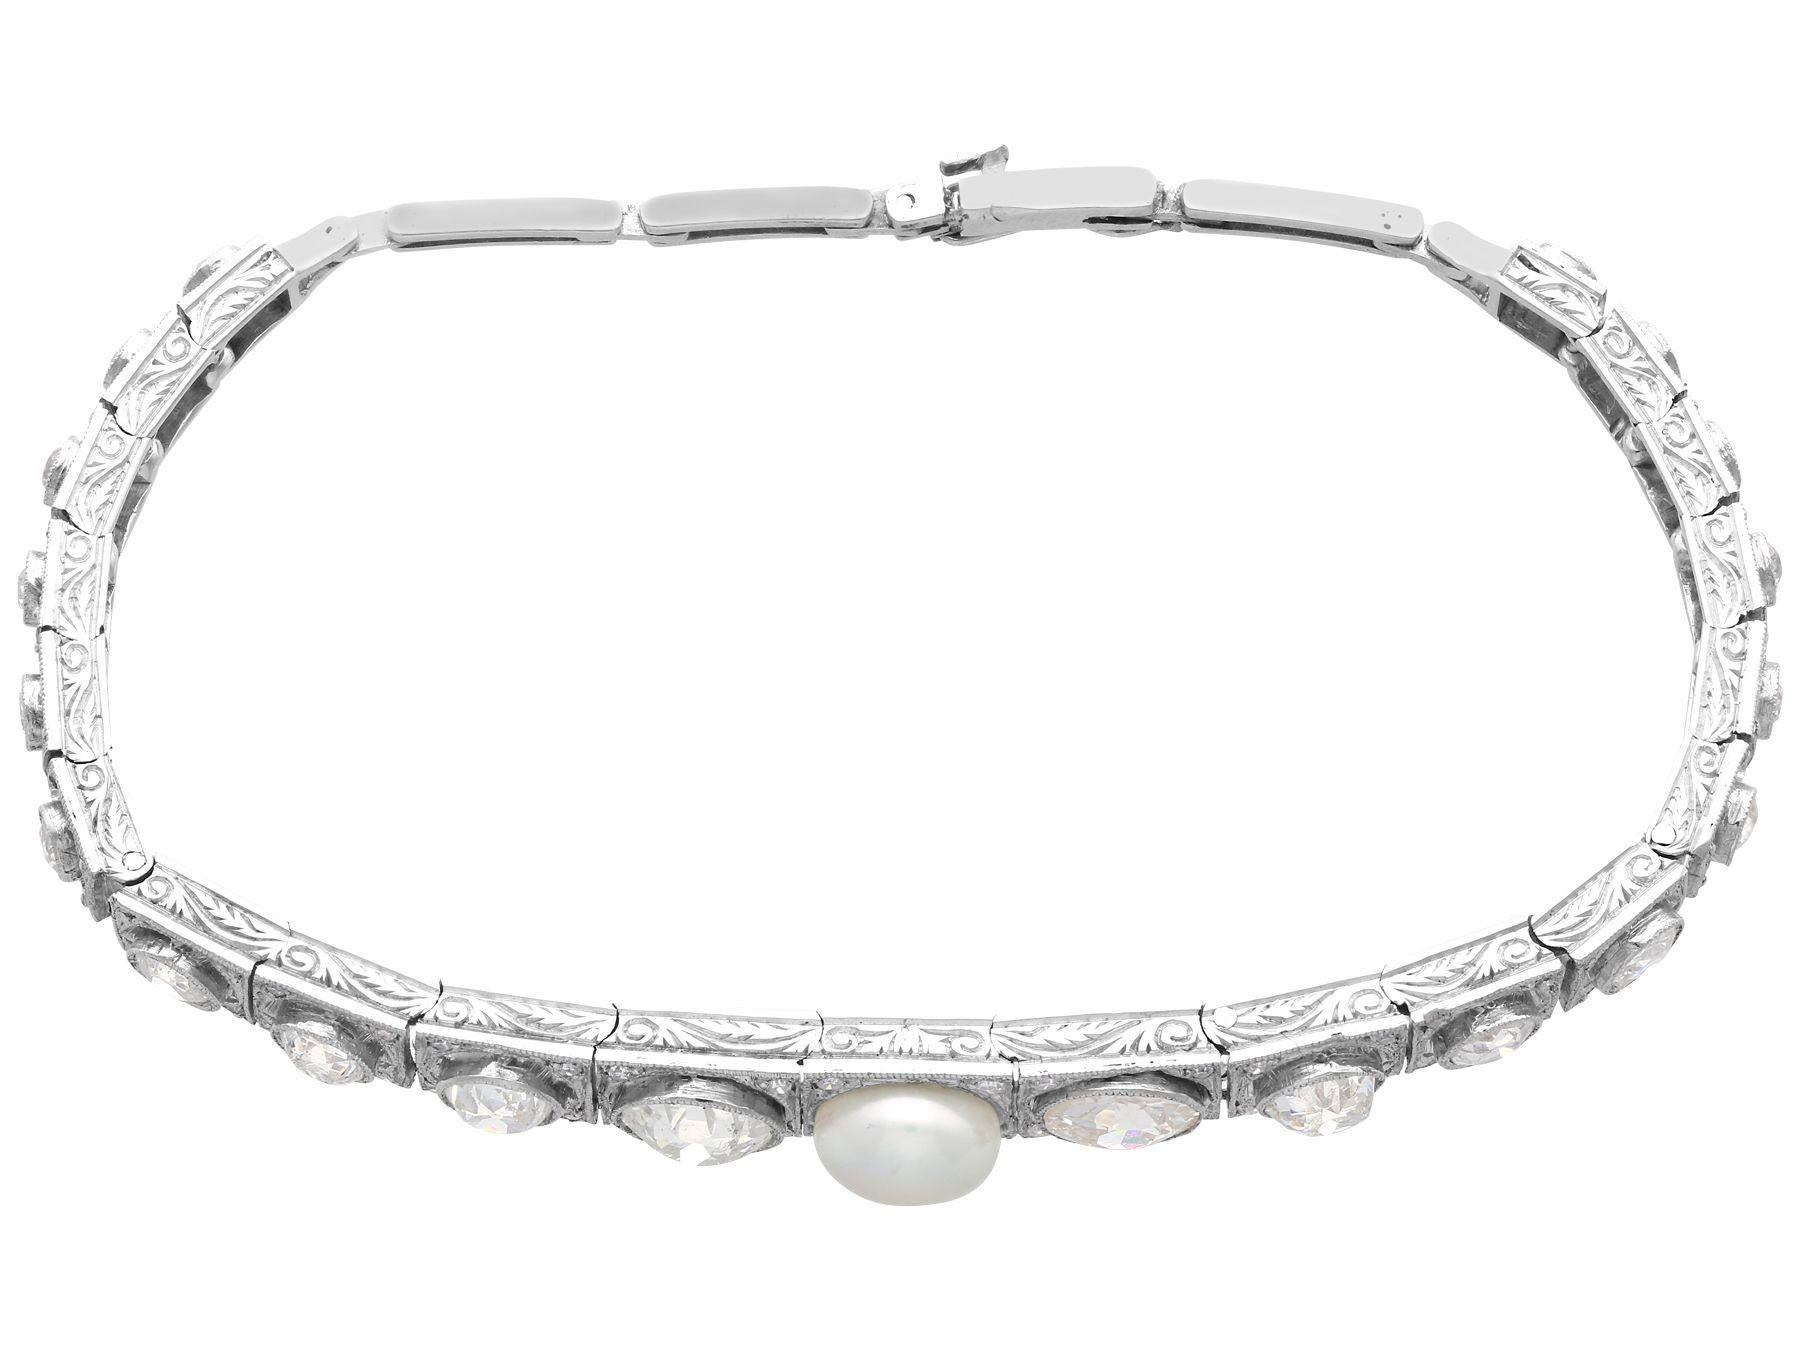 A stunning, fine and impressive 5.61 carat diamond and natural pearl, 18 karat white gold line bracelet; part of our diverse antique jewelry and estate jewelry collections.

This stunning, fine and impressive antique pearl and diamond bracelet has